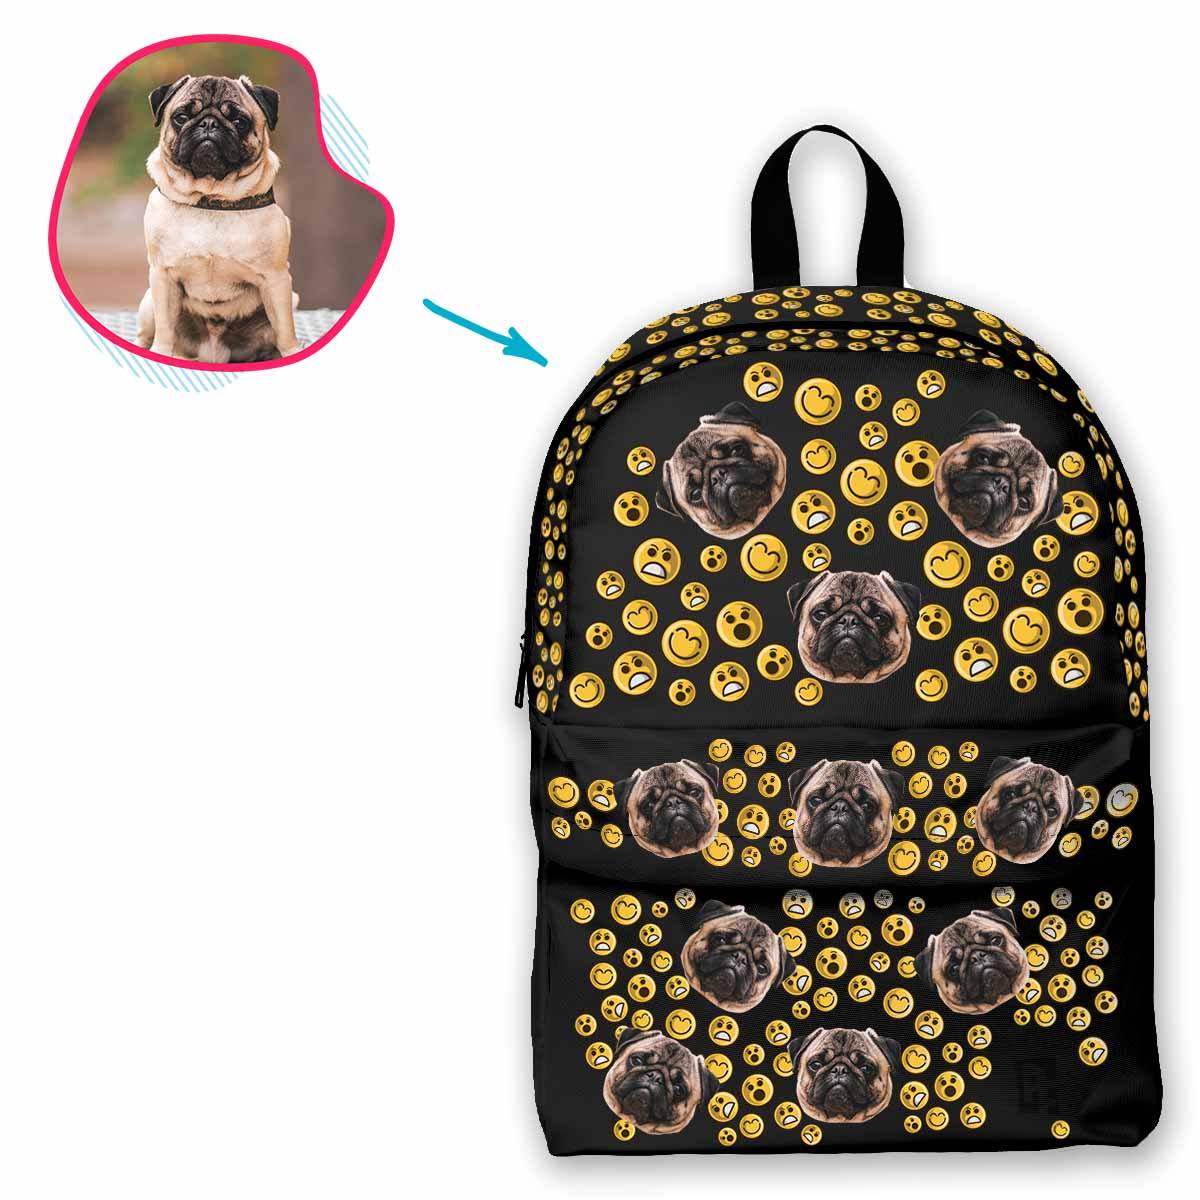 dark Smiles classic backpack personalized with photo of face printed on it